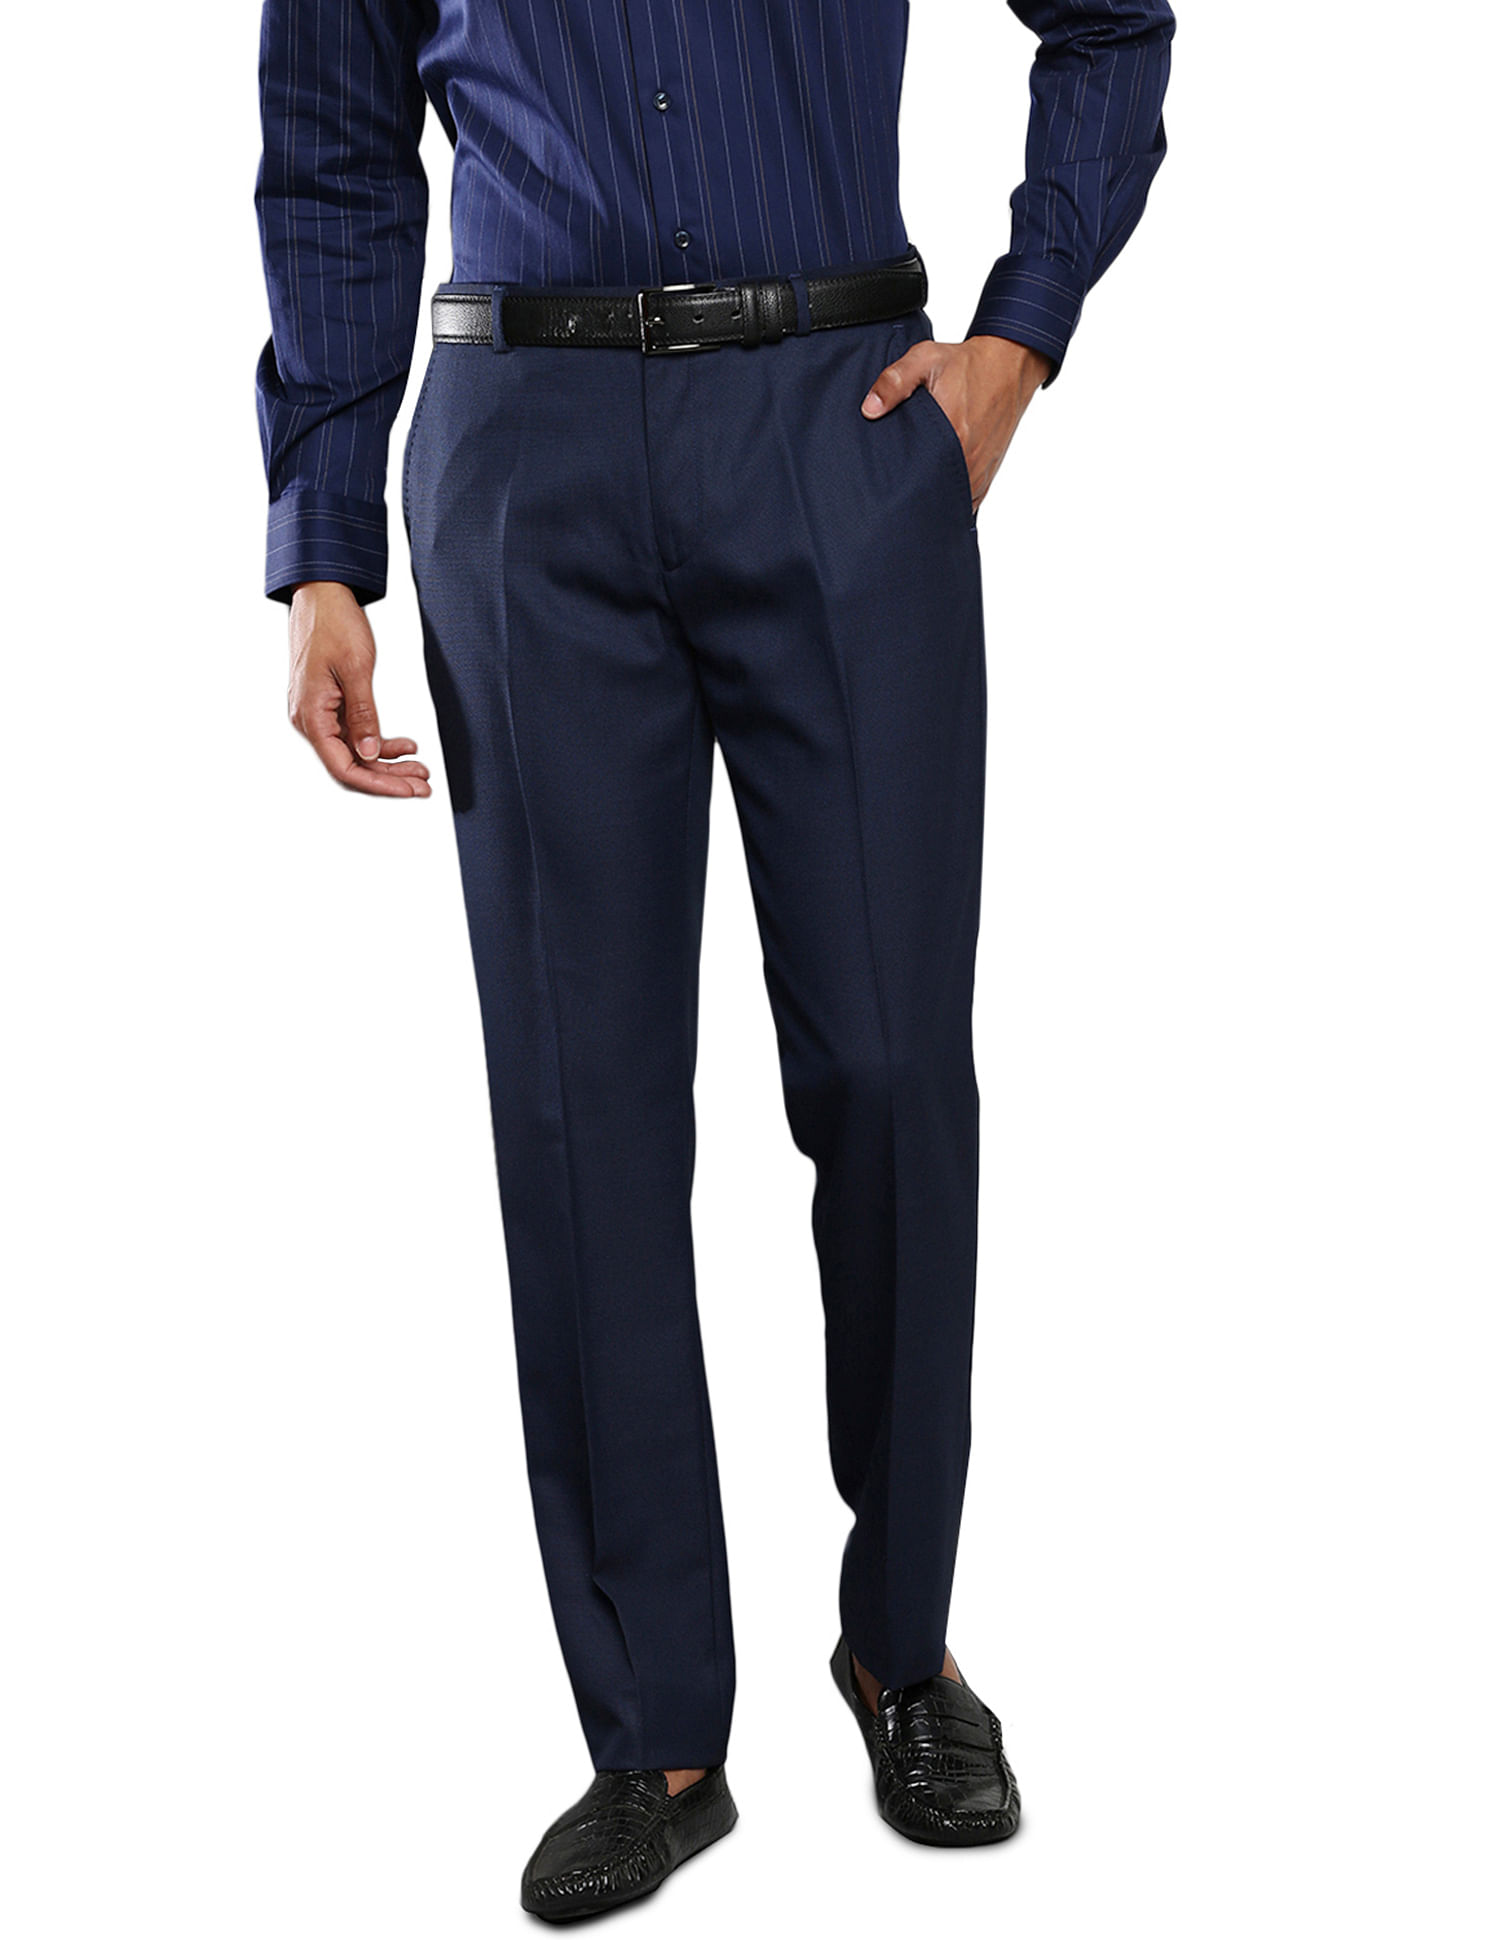 Mens Navy Blue Cotton Spandex Solid Trousers  Style Union